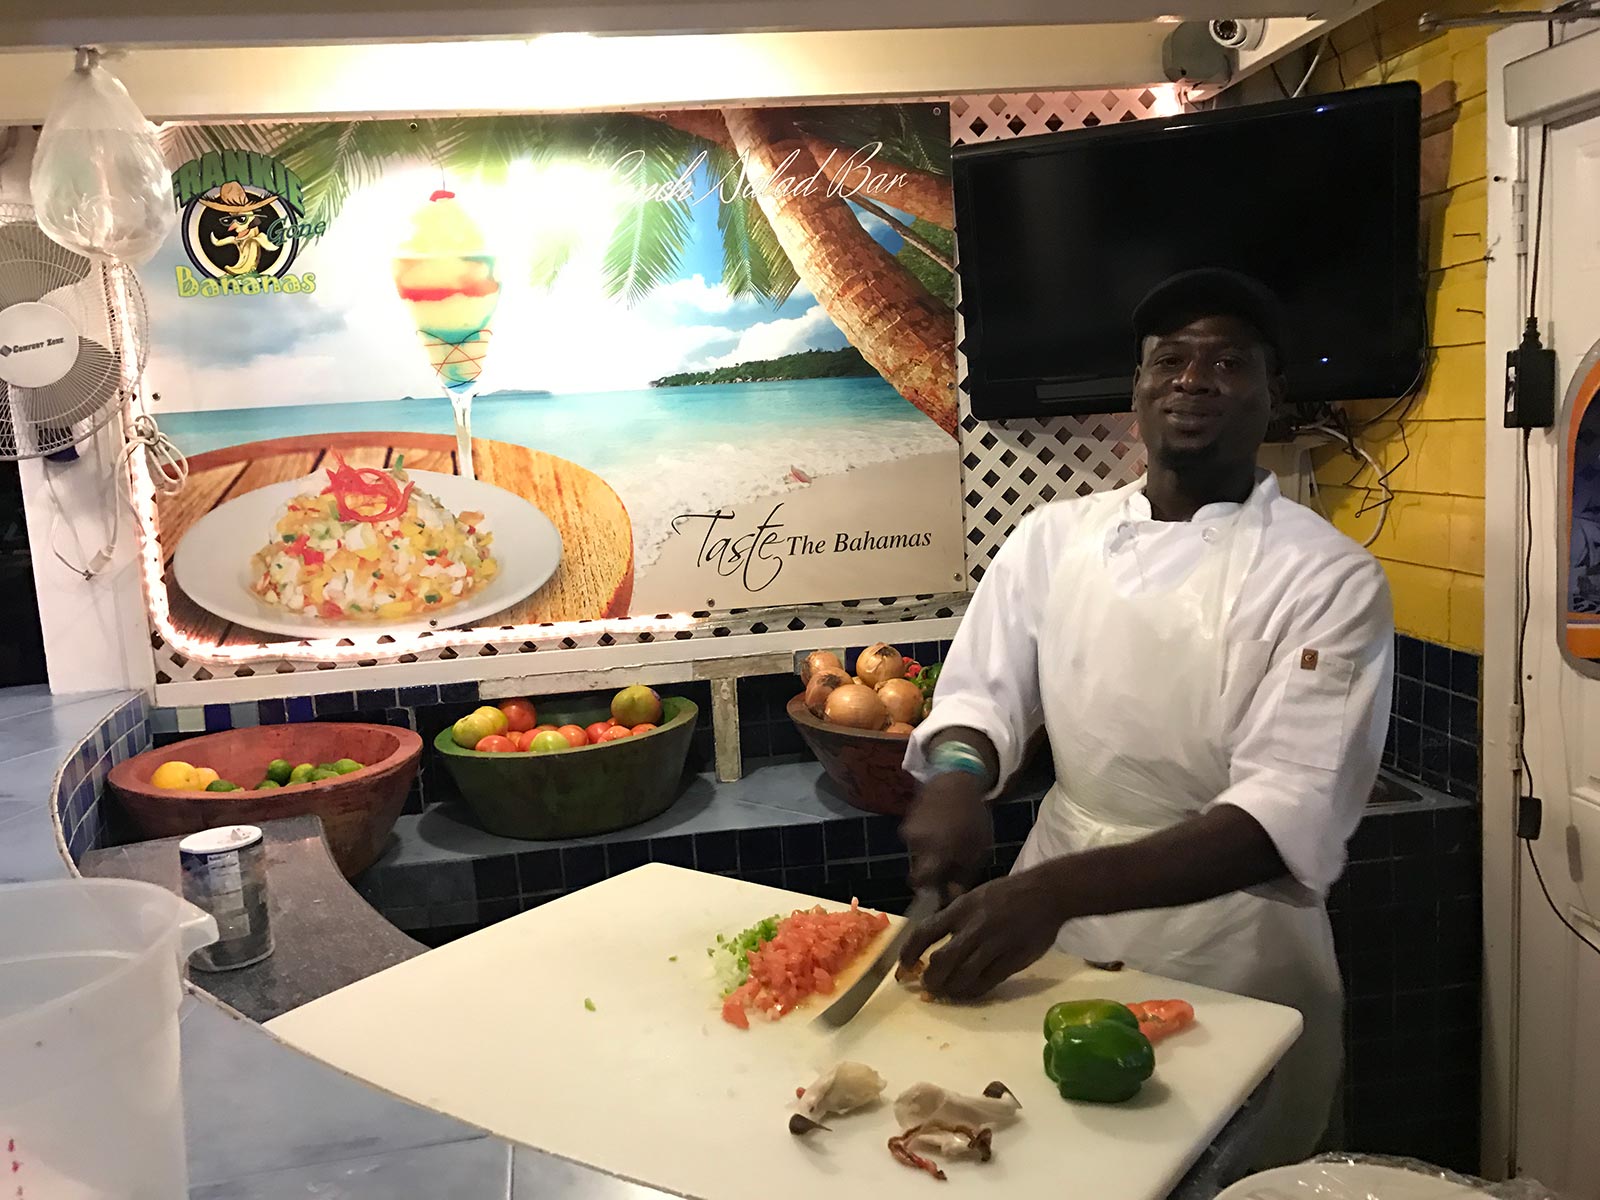 Local cook preparing food in the Bahamas. Diving with sharks in the Bahamas